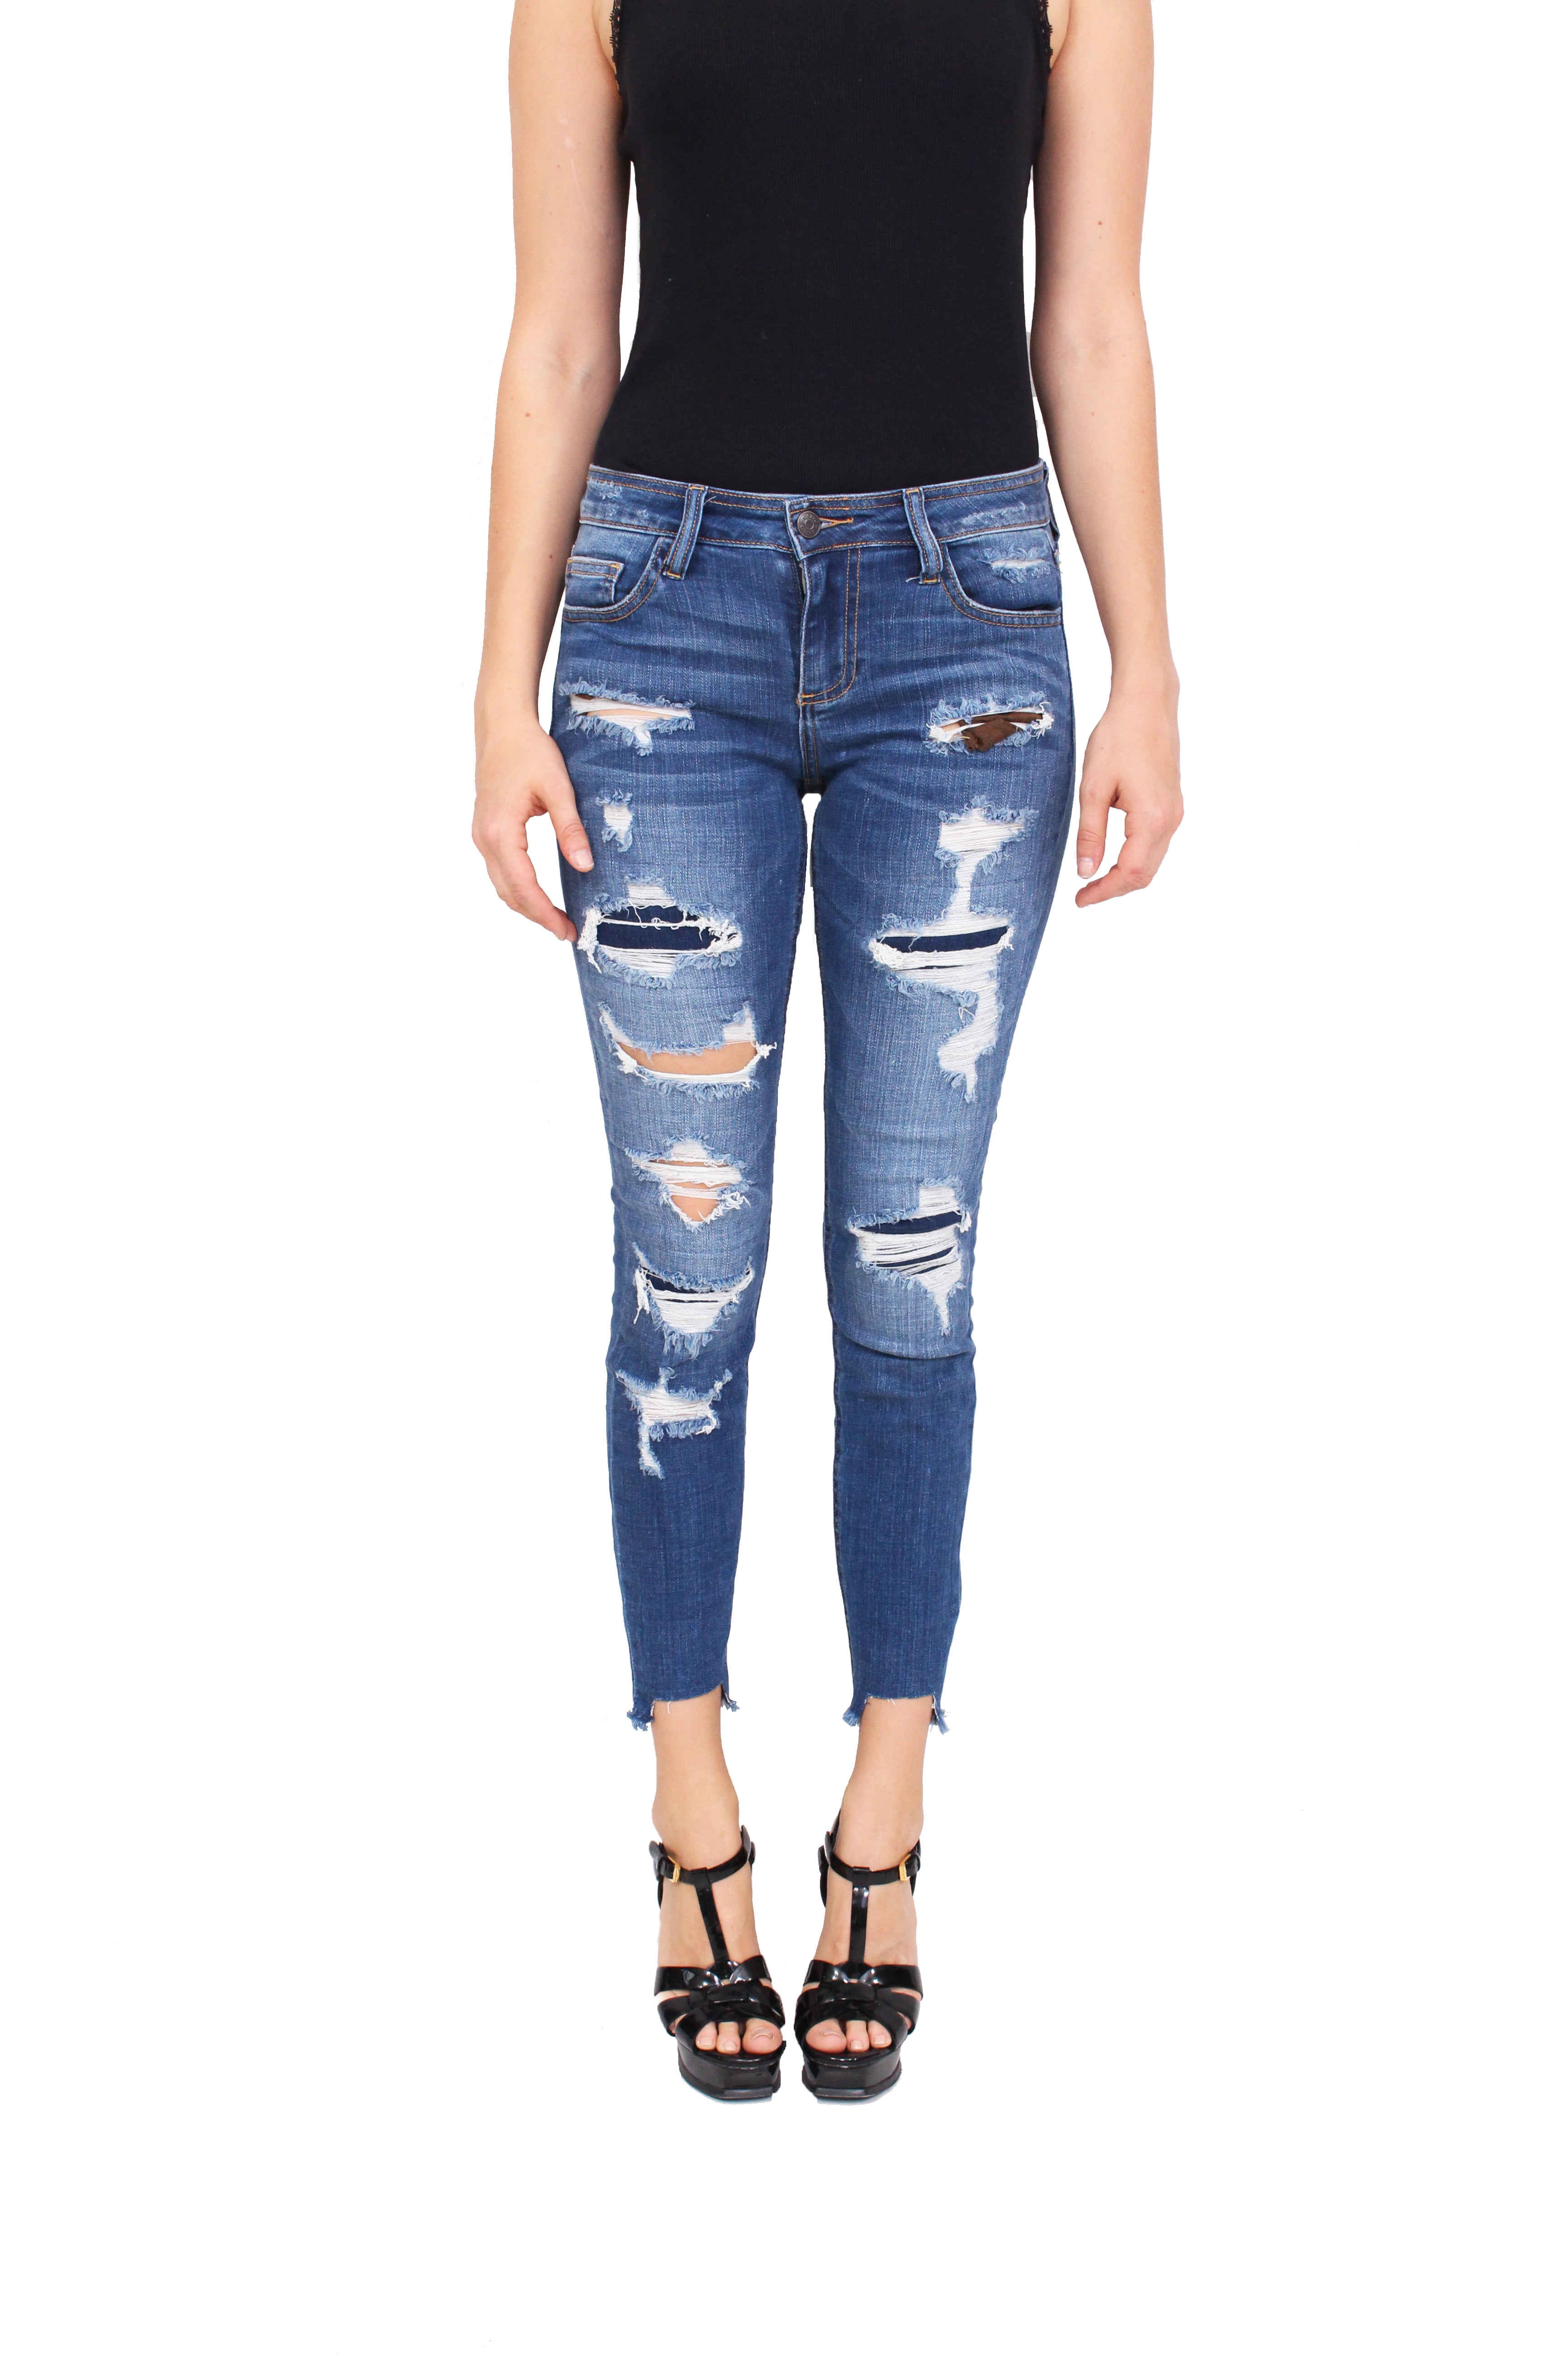 Cello Jeans Womens Mid-Rise Uneven Hem Cropped Skinny Jean